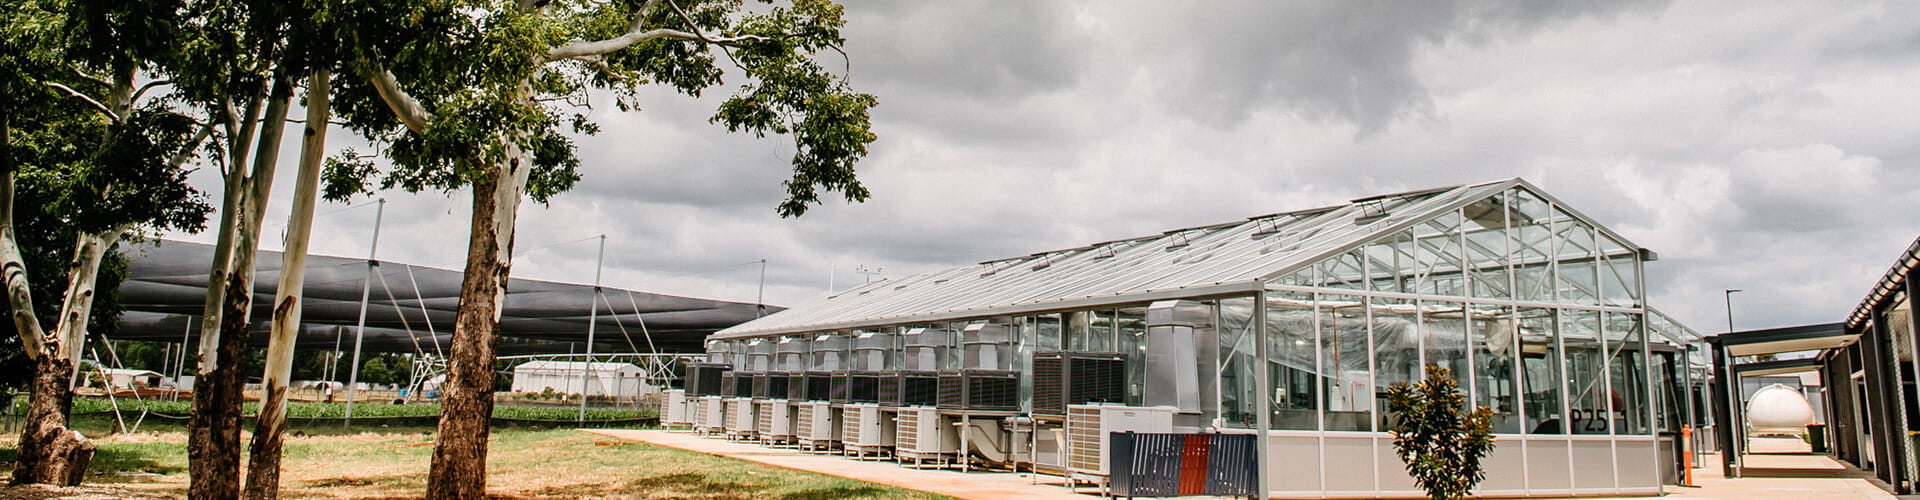 Modern greenhouse with adjacent outdoor hvac units under a cloudy sky.